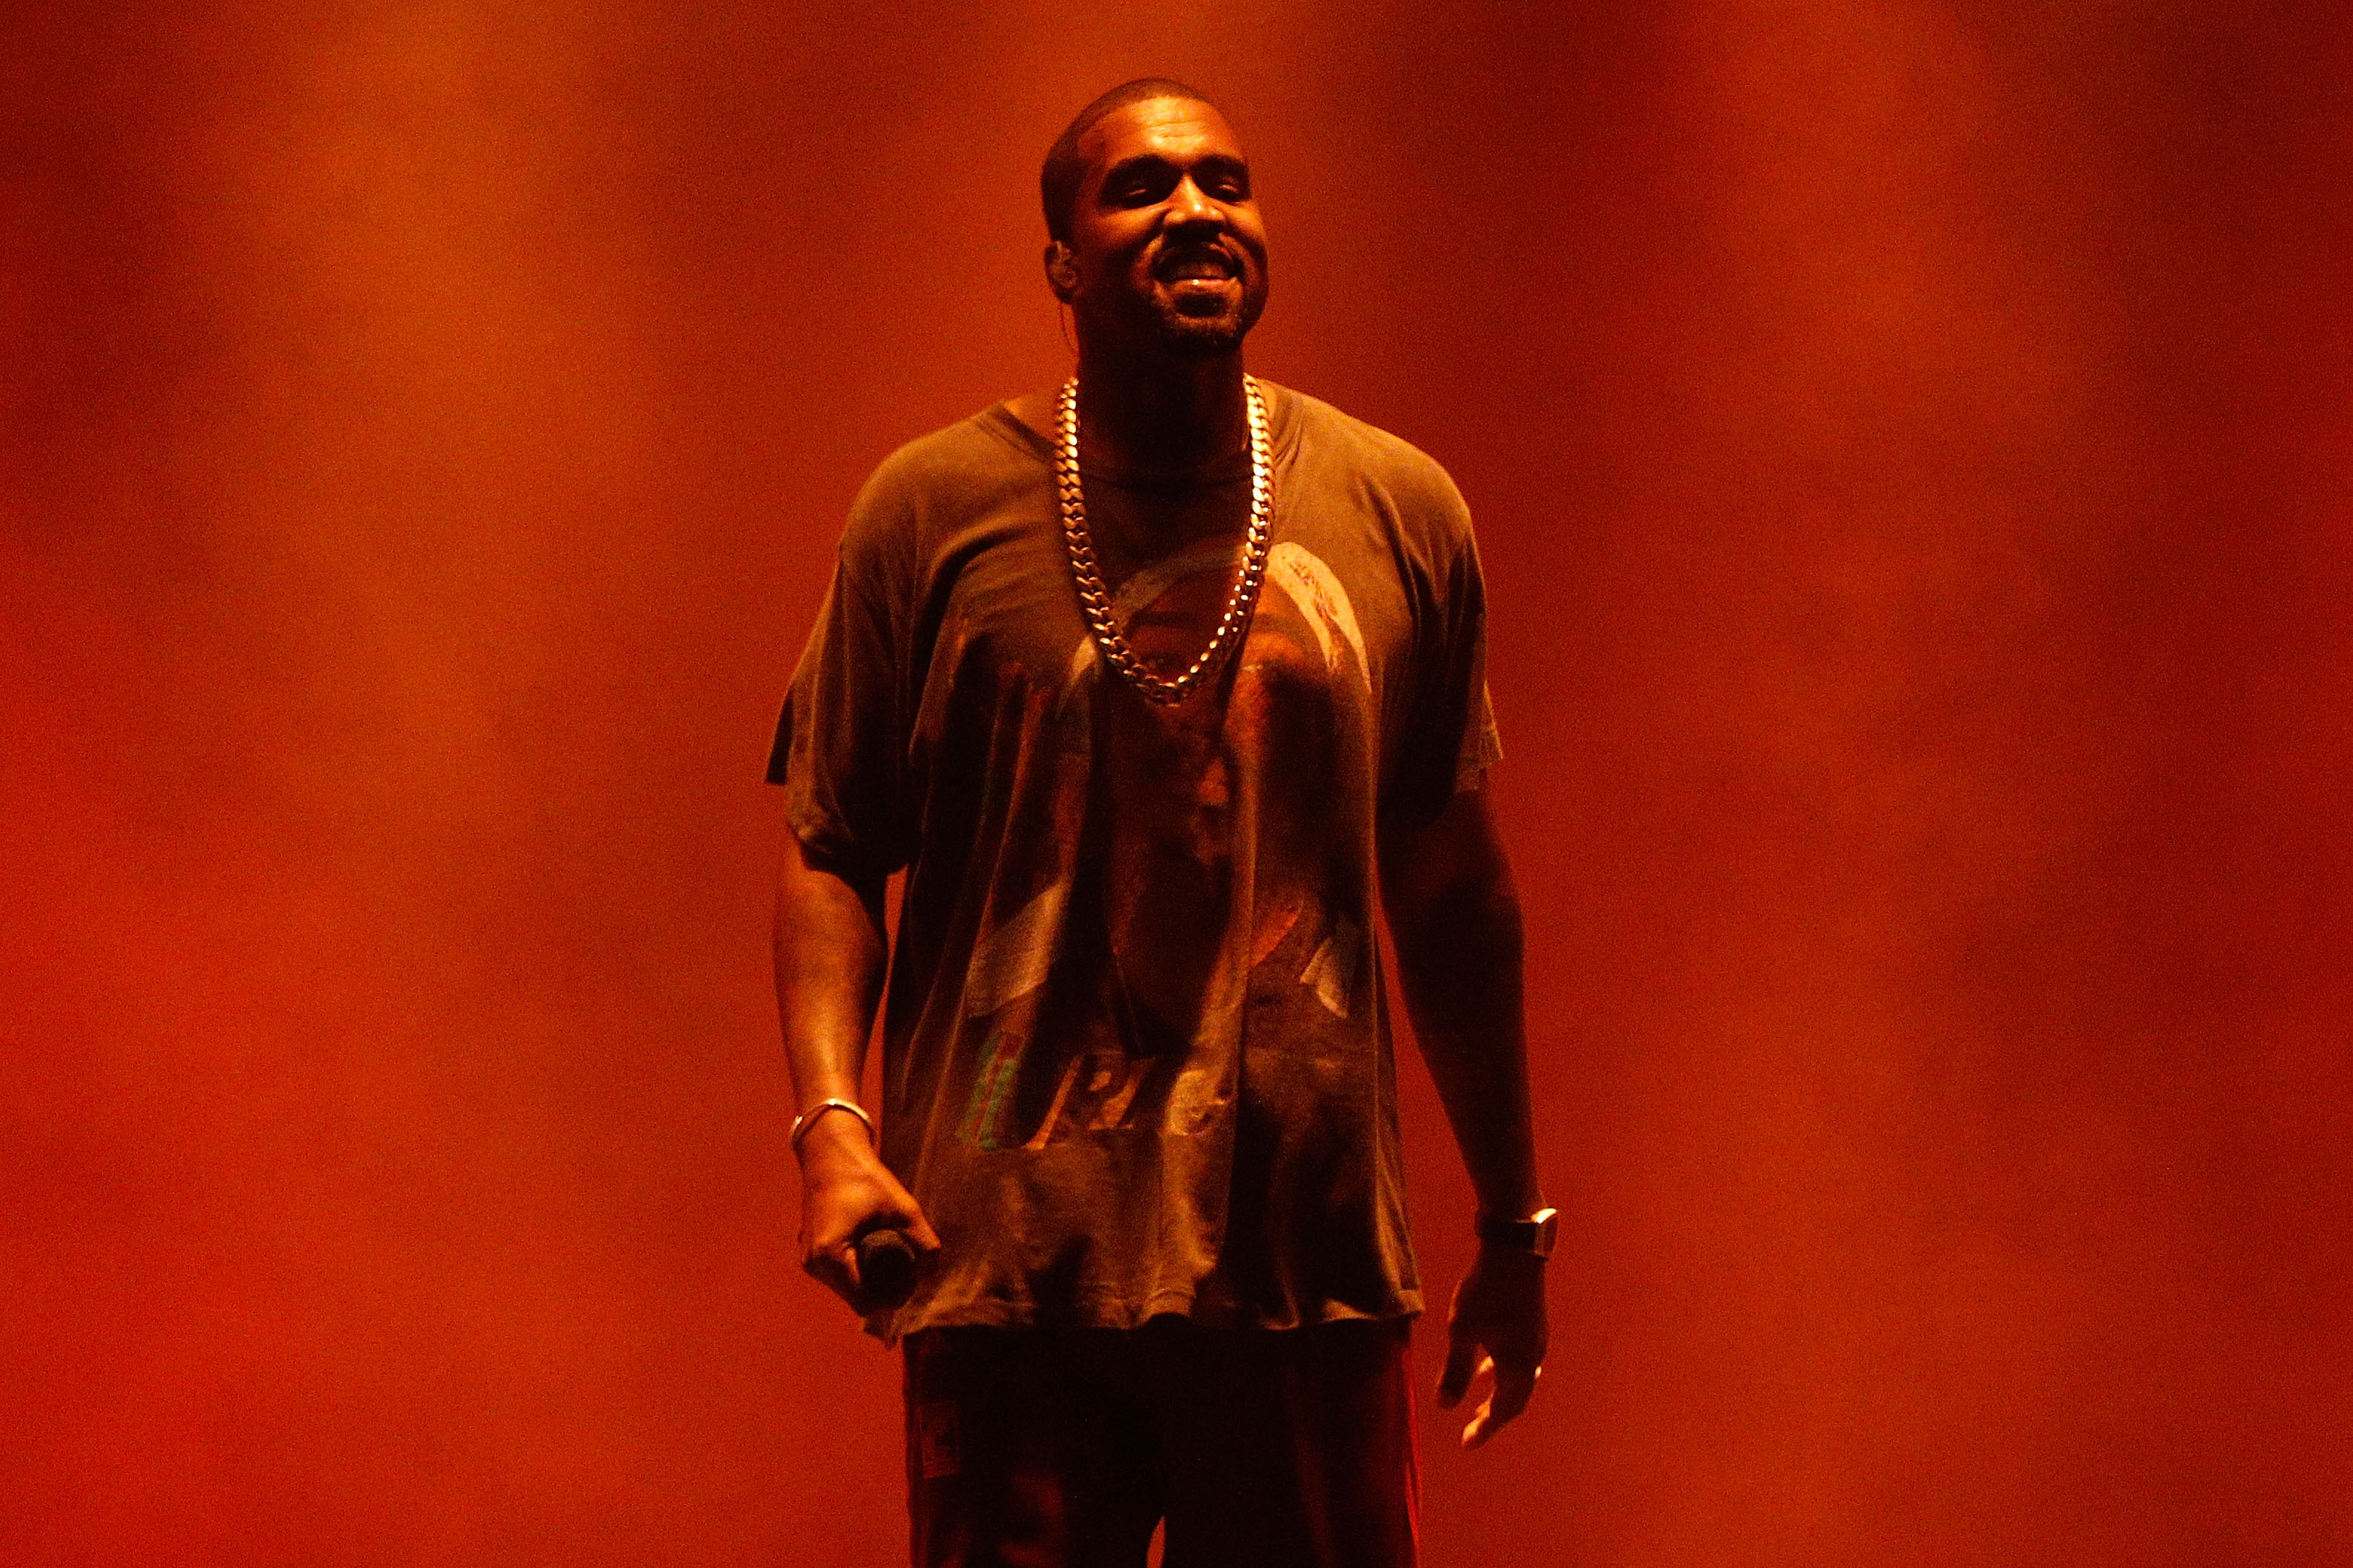 Kanye West 2016 Live in New York